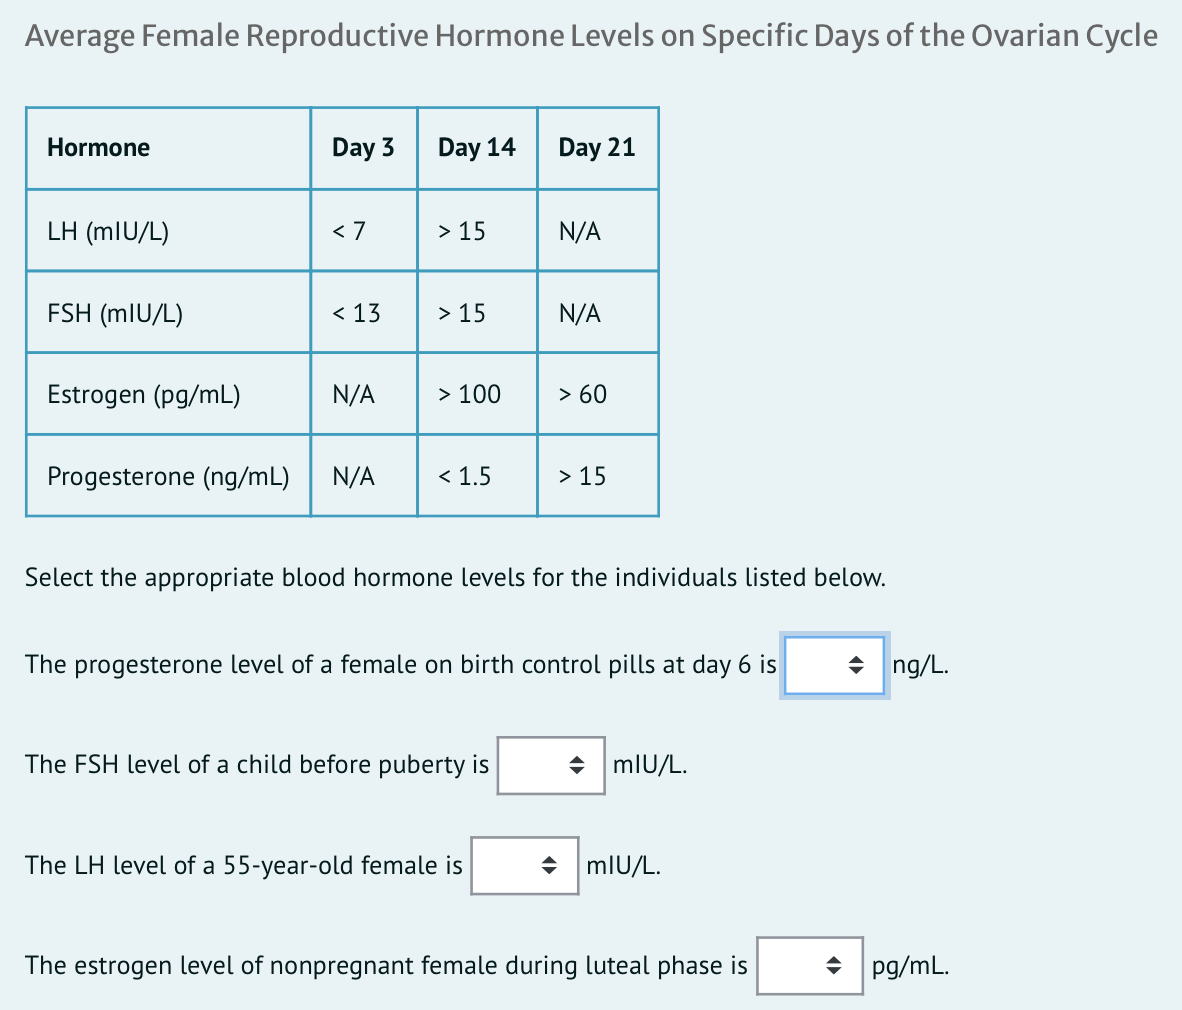 Average Female Reproductive Hormone Levels on Specific Days of the Ovarian Cycle
Hormone
Day 3
Day 14
Day 21
LH (mlU/L)
< 7
> 15
N/A
FSH (mlU/L)
< 13
> 15
N/A
Estrogen (pg/mL)
N/A
> 100
> 60
Progesterone (ng/mL)
N/A
< 1.5
> 15
Select the appropriate blood hormone levels for the individuals listed below.
The progesterone level of a female on birth control pills at day 6 is
+ ng/L.
The FSH level of a child before puberty is
+ mlU/L.
The LH level of a 55-year-old female is
+ mlU/L.
The estrogen level of nonpregnant female during luteal phase is
• pg/mL.
